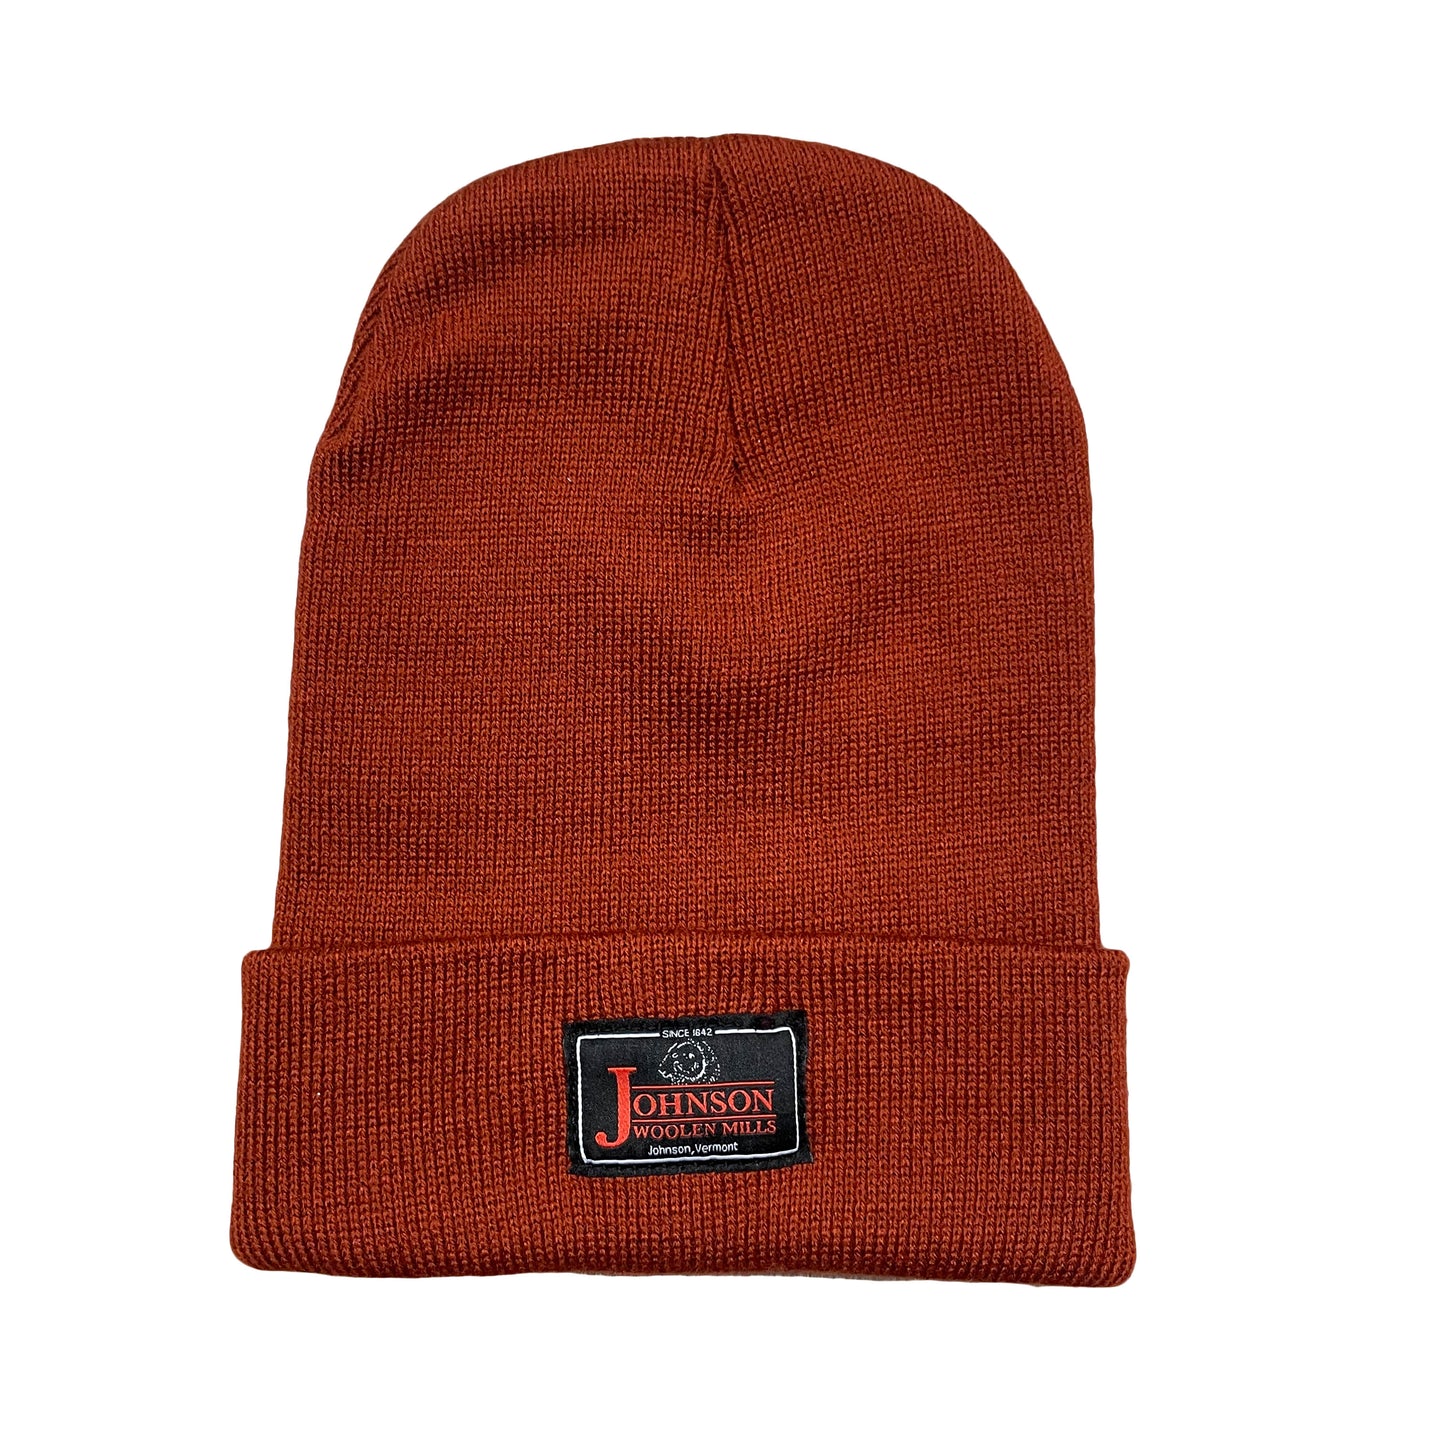 Rust beanie with black label